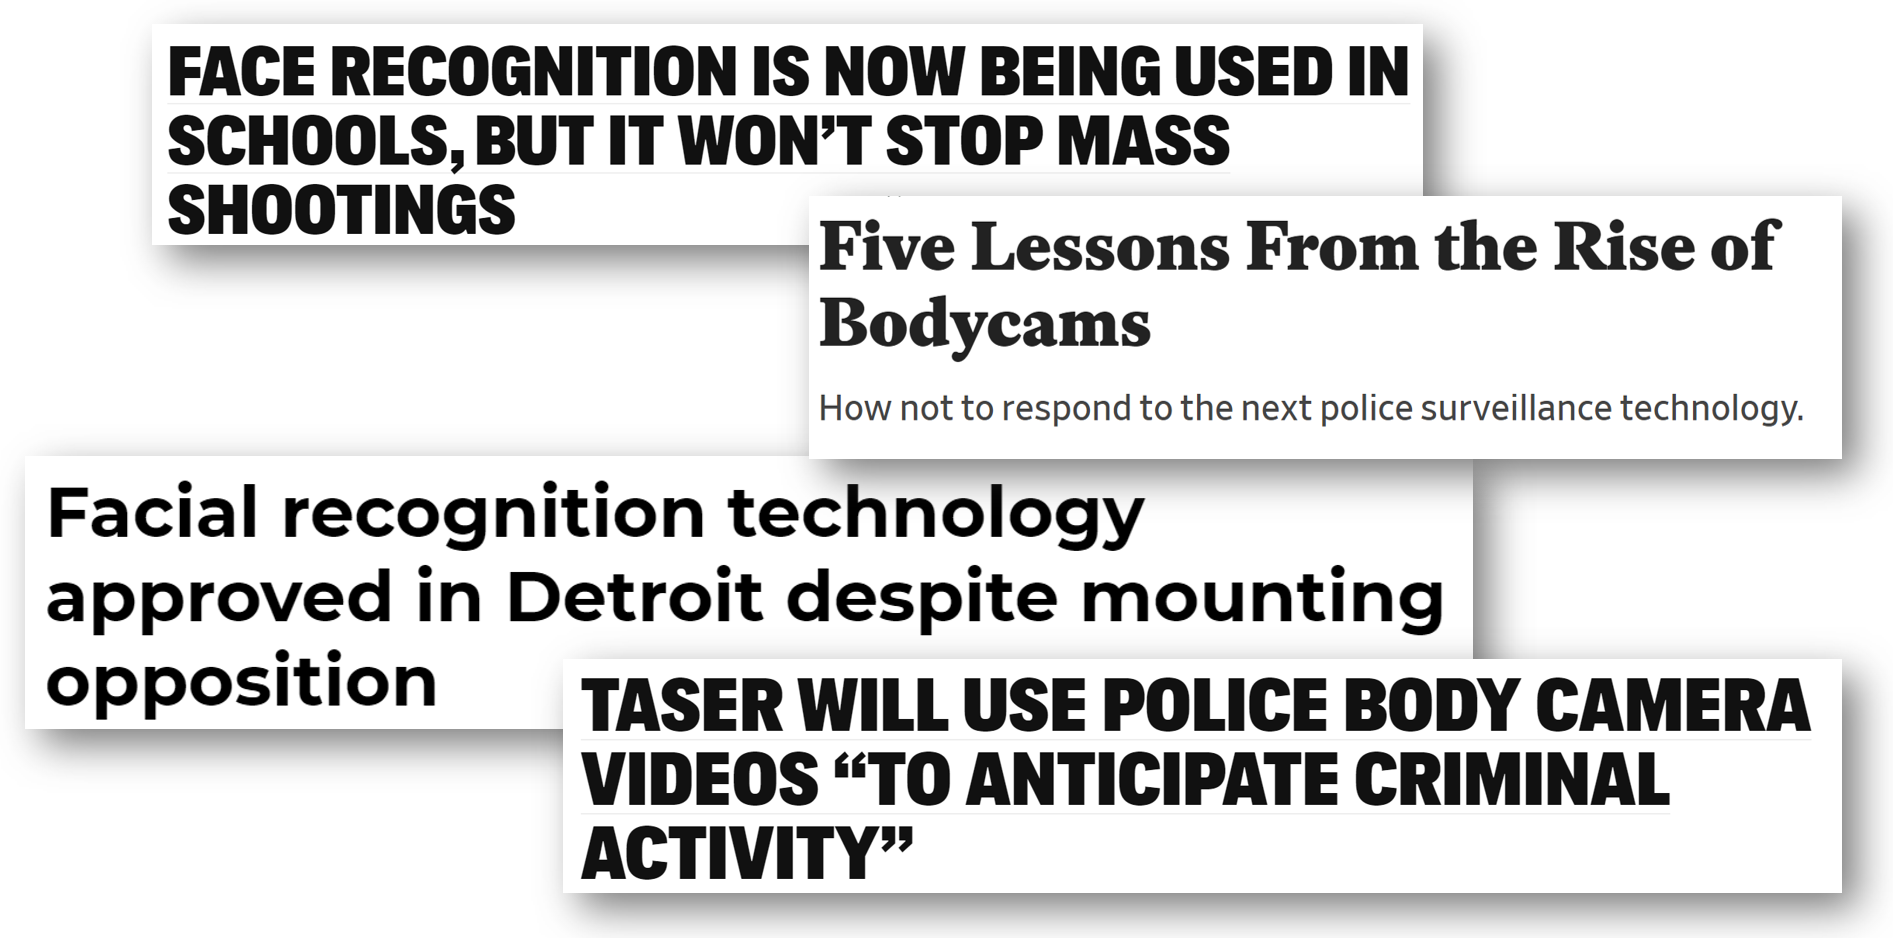 Headlines of articles related to government use of technology